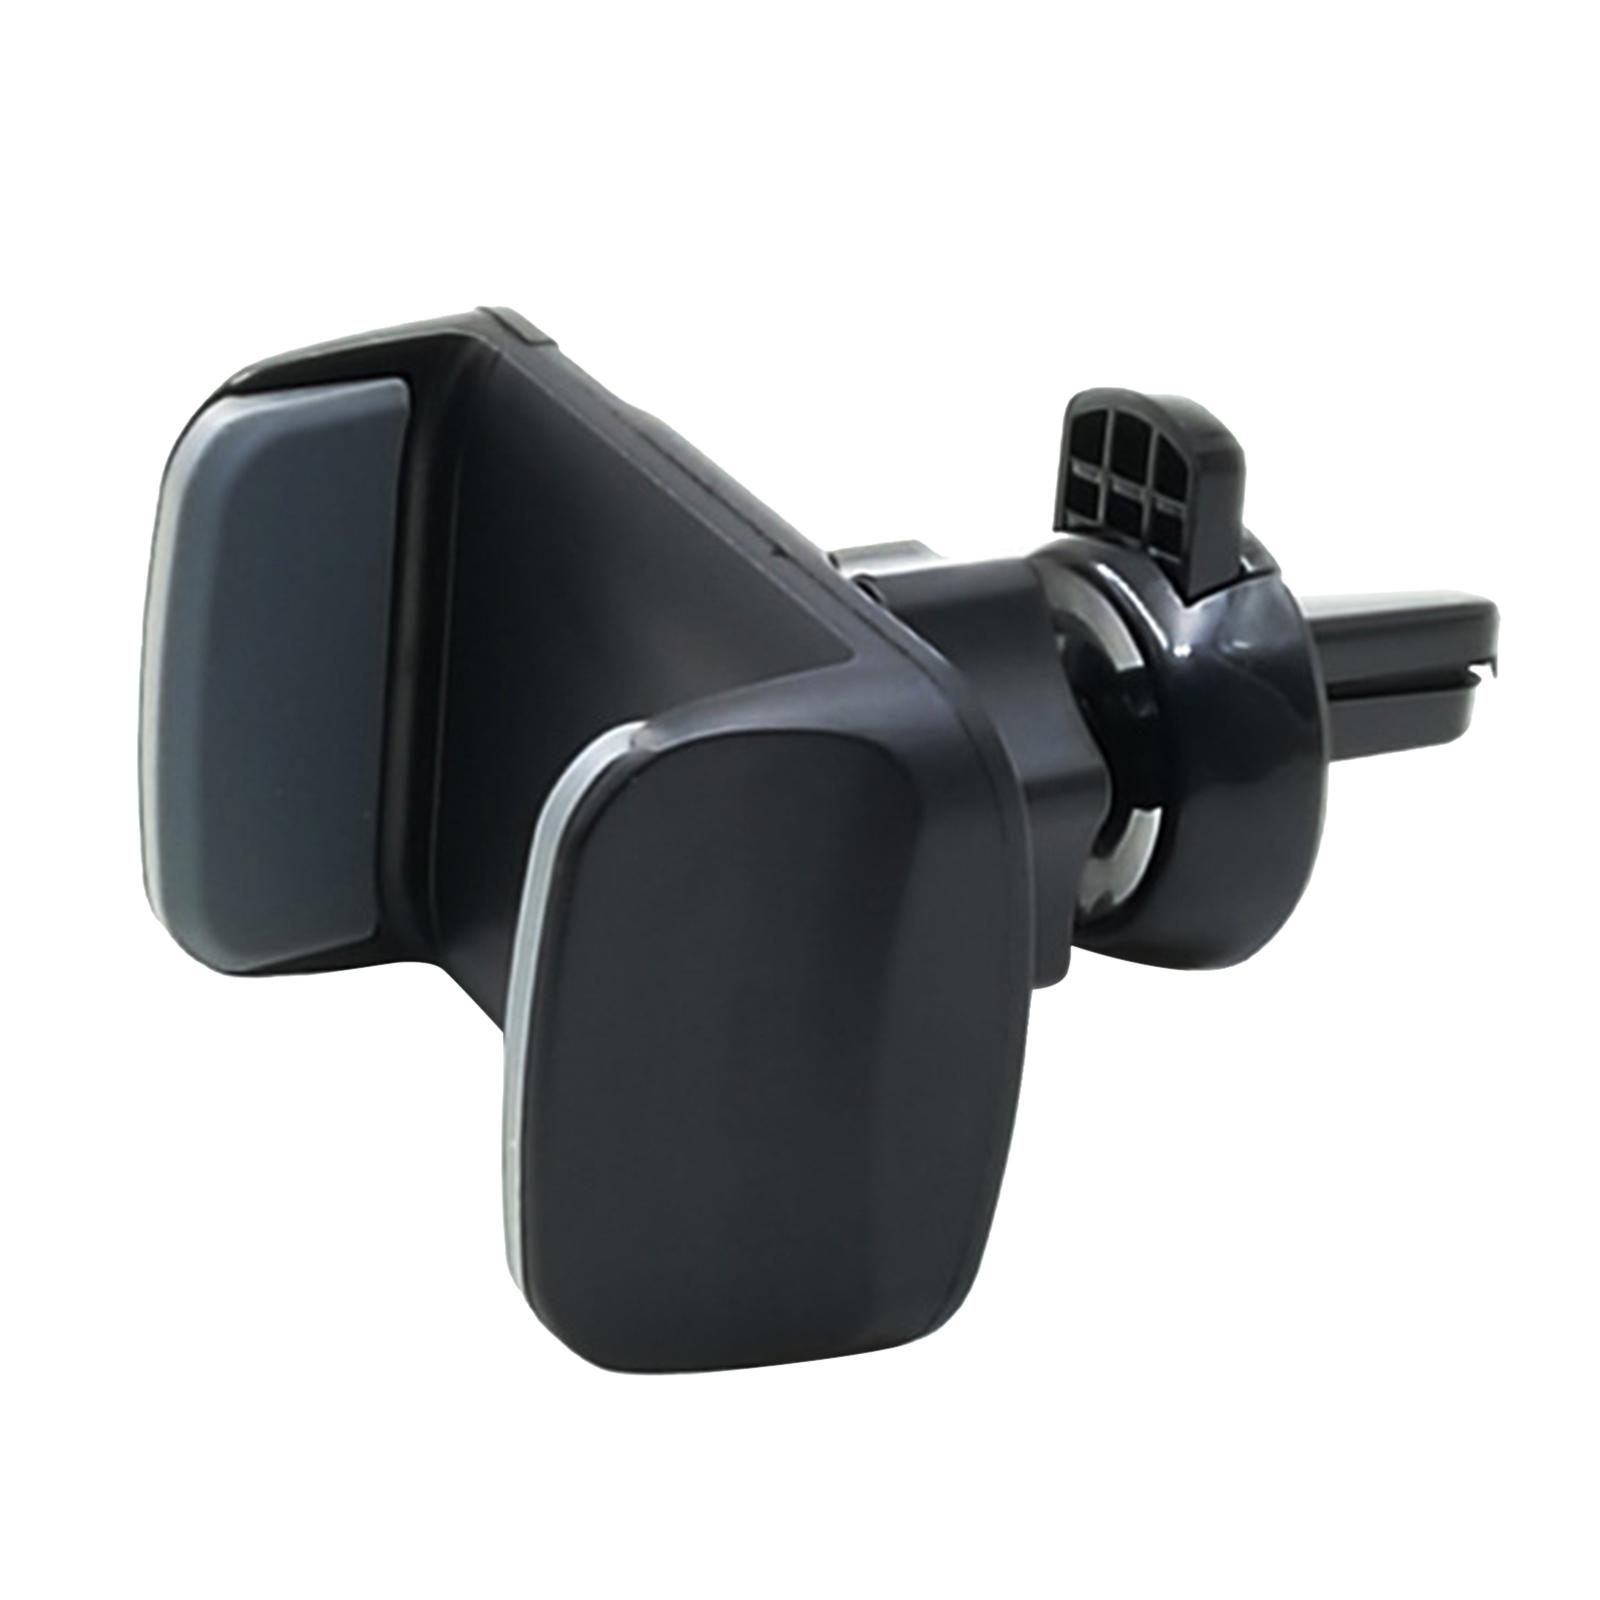 Suction Cup Universal Car Phone Holder Silicone for Auto Air Vent Smartphone air outlet black  gray